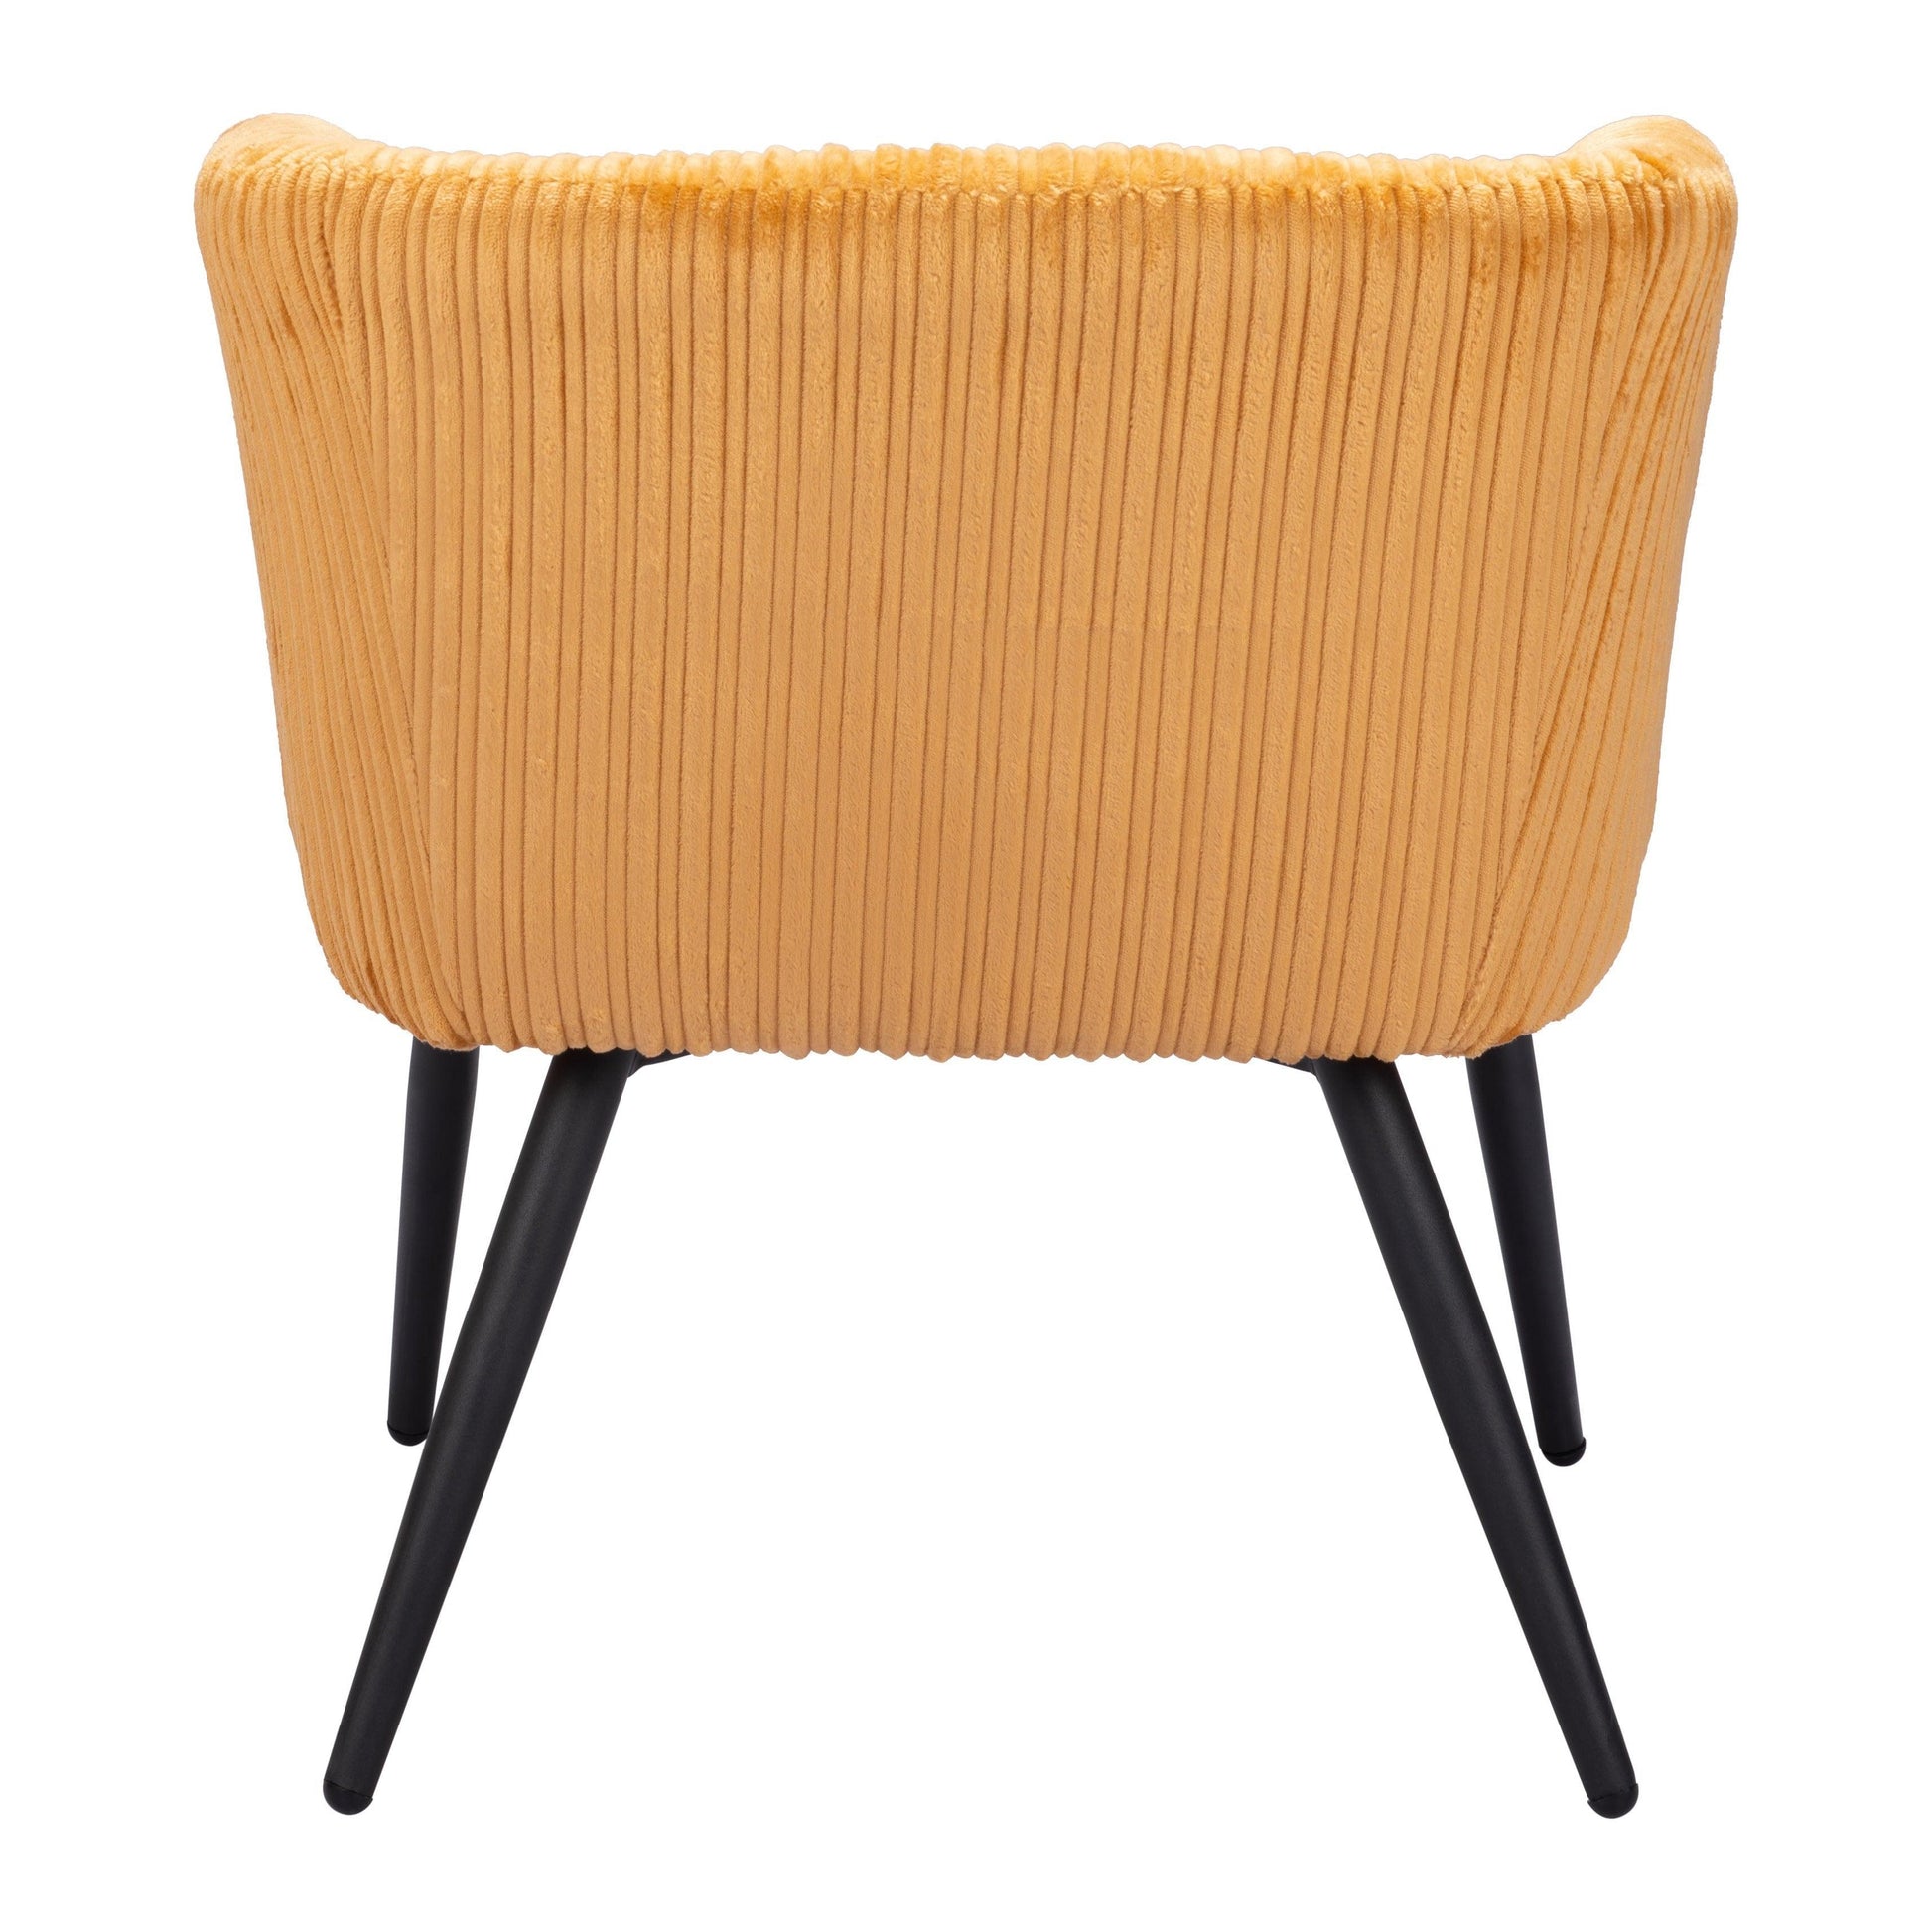 Papillion Accent Chair Yellow - Sideboards and Things Brand_Zuo Modern, Color_Black, Color_Yellow, Finish_Powder Coated, Materials_Metal, Materials_Wood, Metal Type_Steel, Product Type_Occasional Chair, Upholstery Type_Fabric Blend, Upholstery Type_Polyester, Wood Species_Plywood